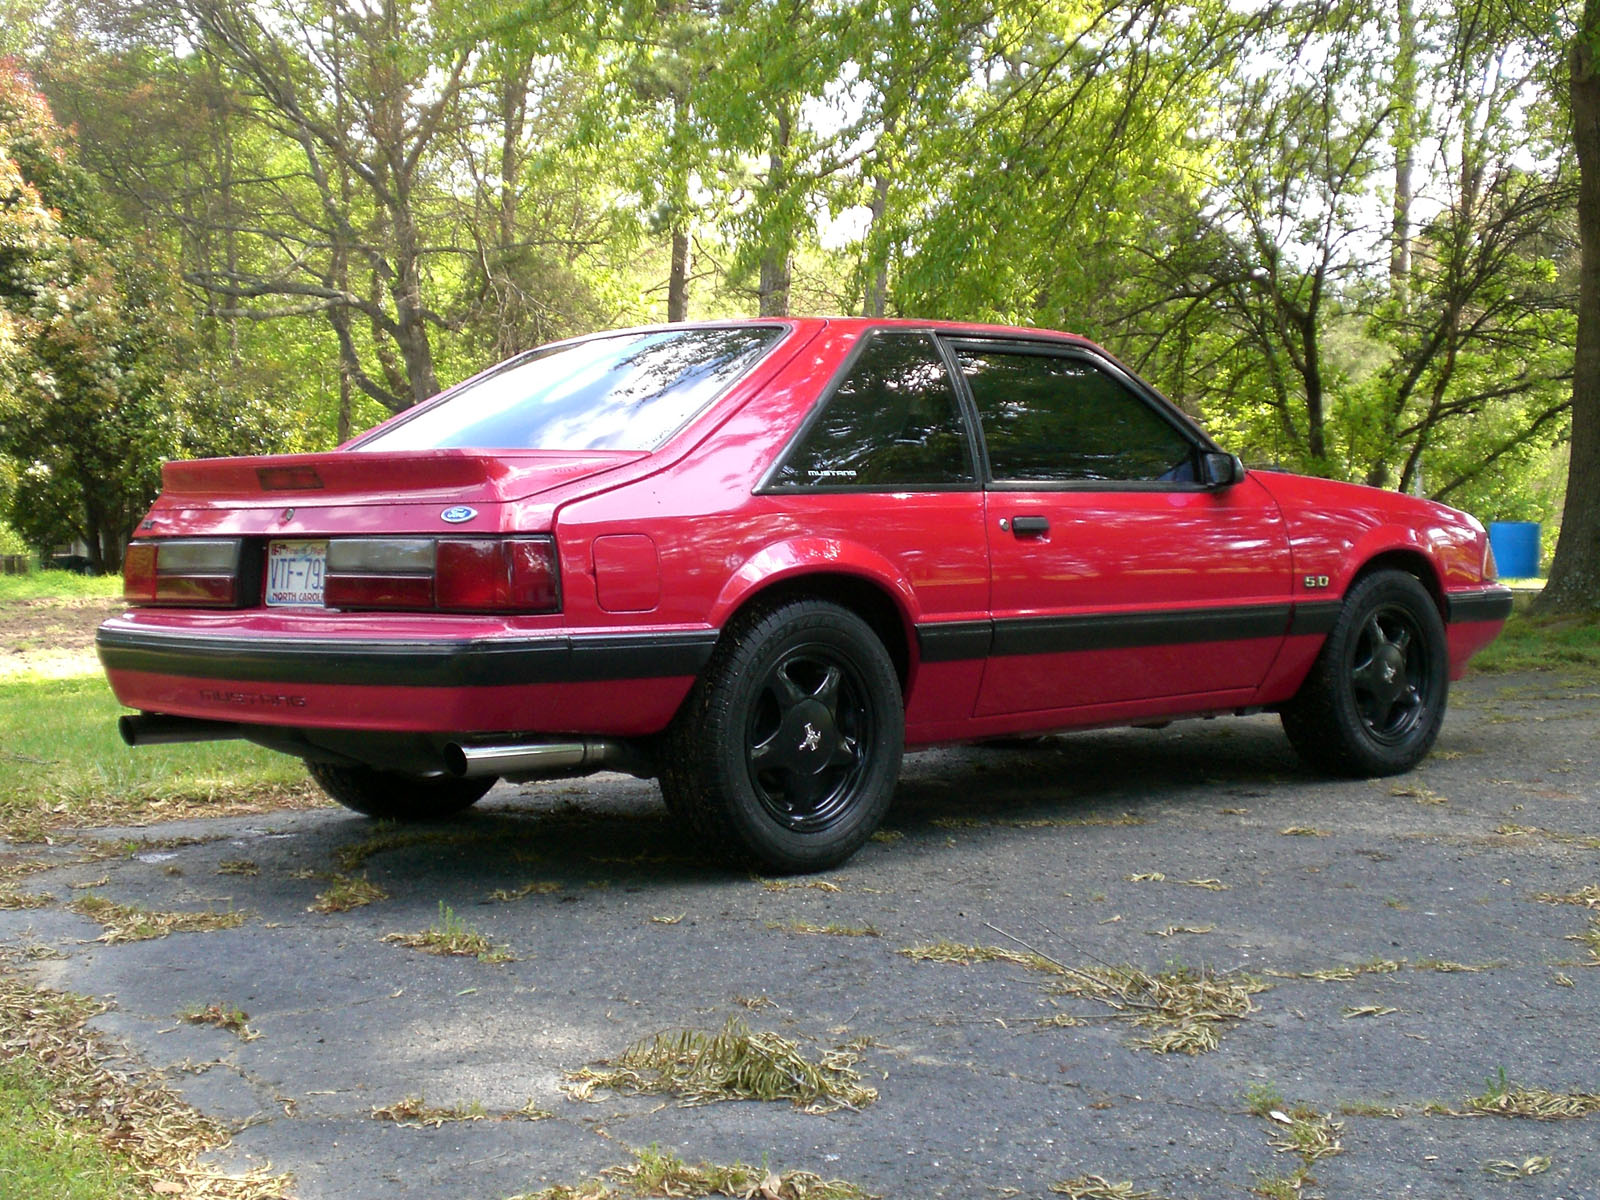  1991 Ford Mustang lx